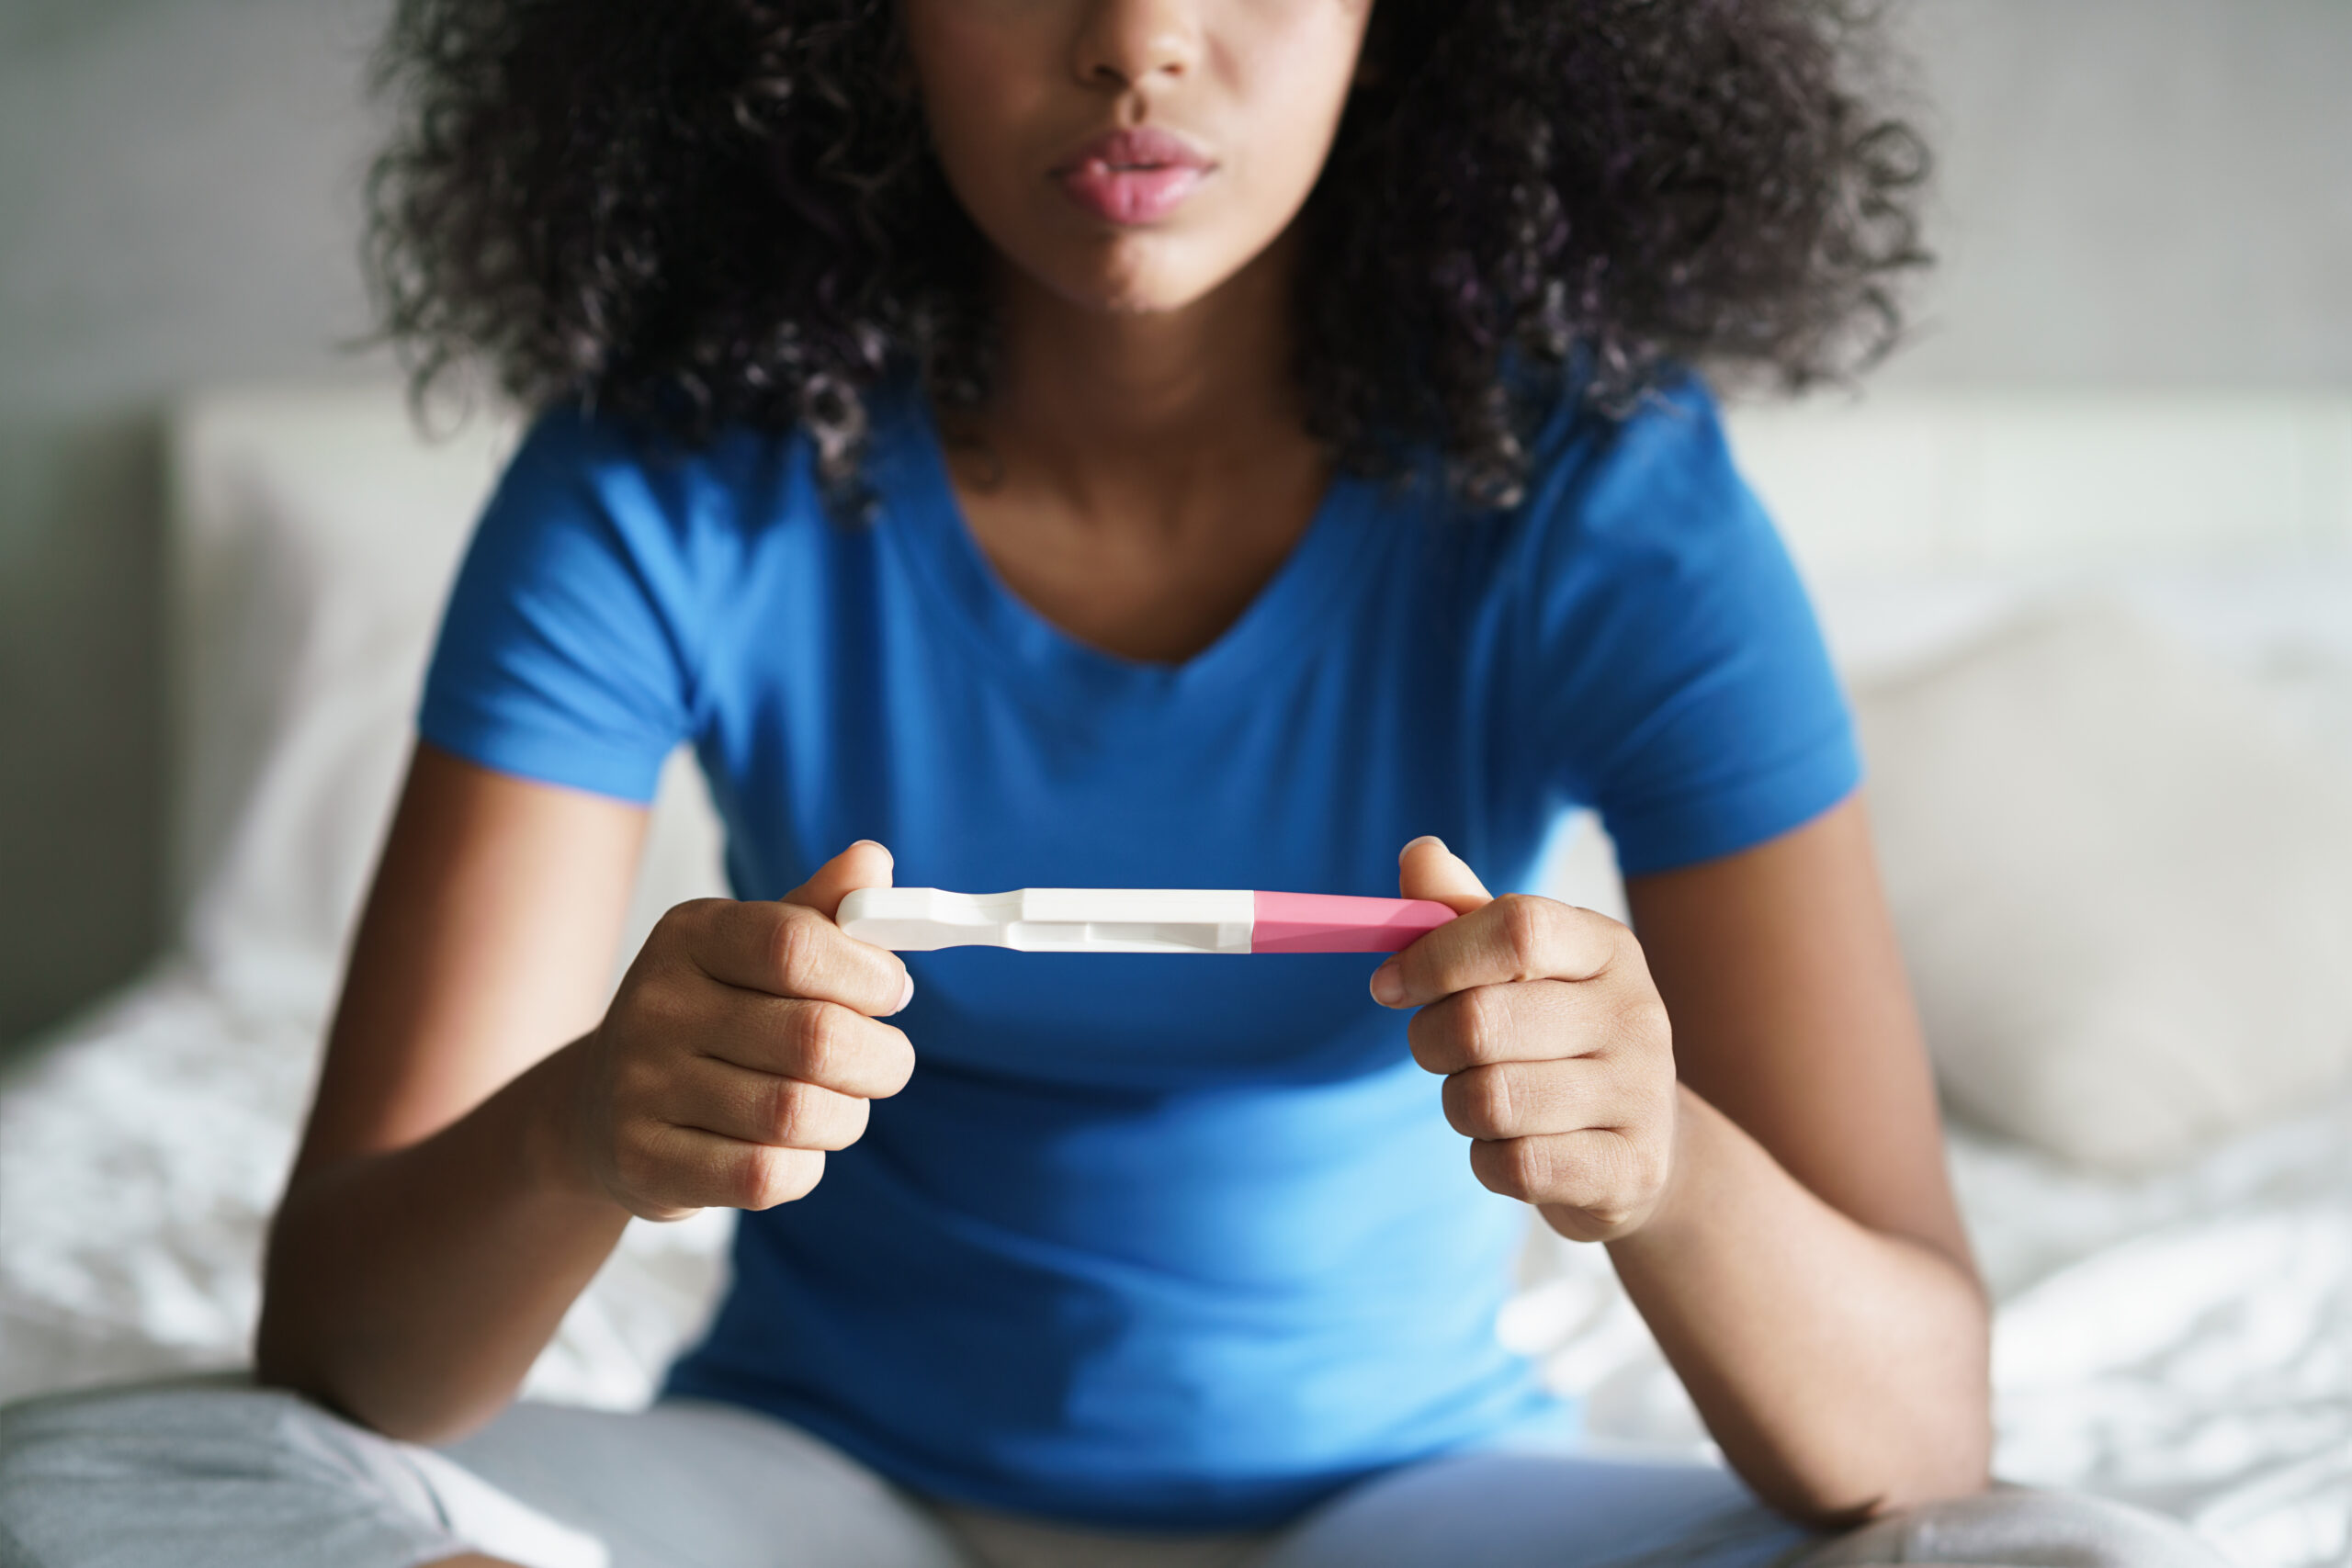 Lady having a negative pregnancy test but no period - now what?